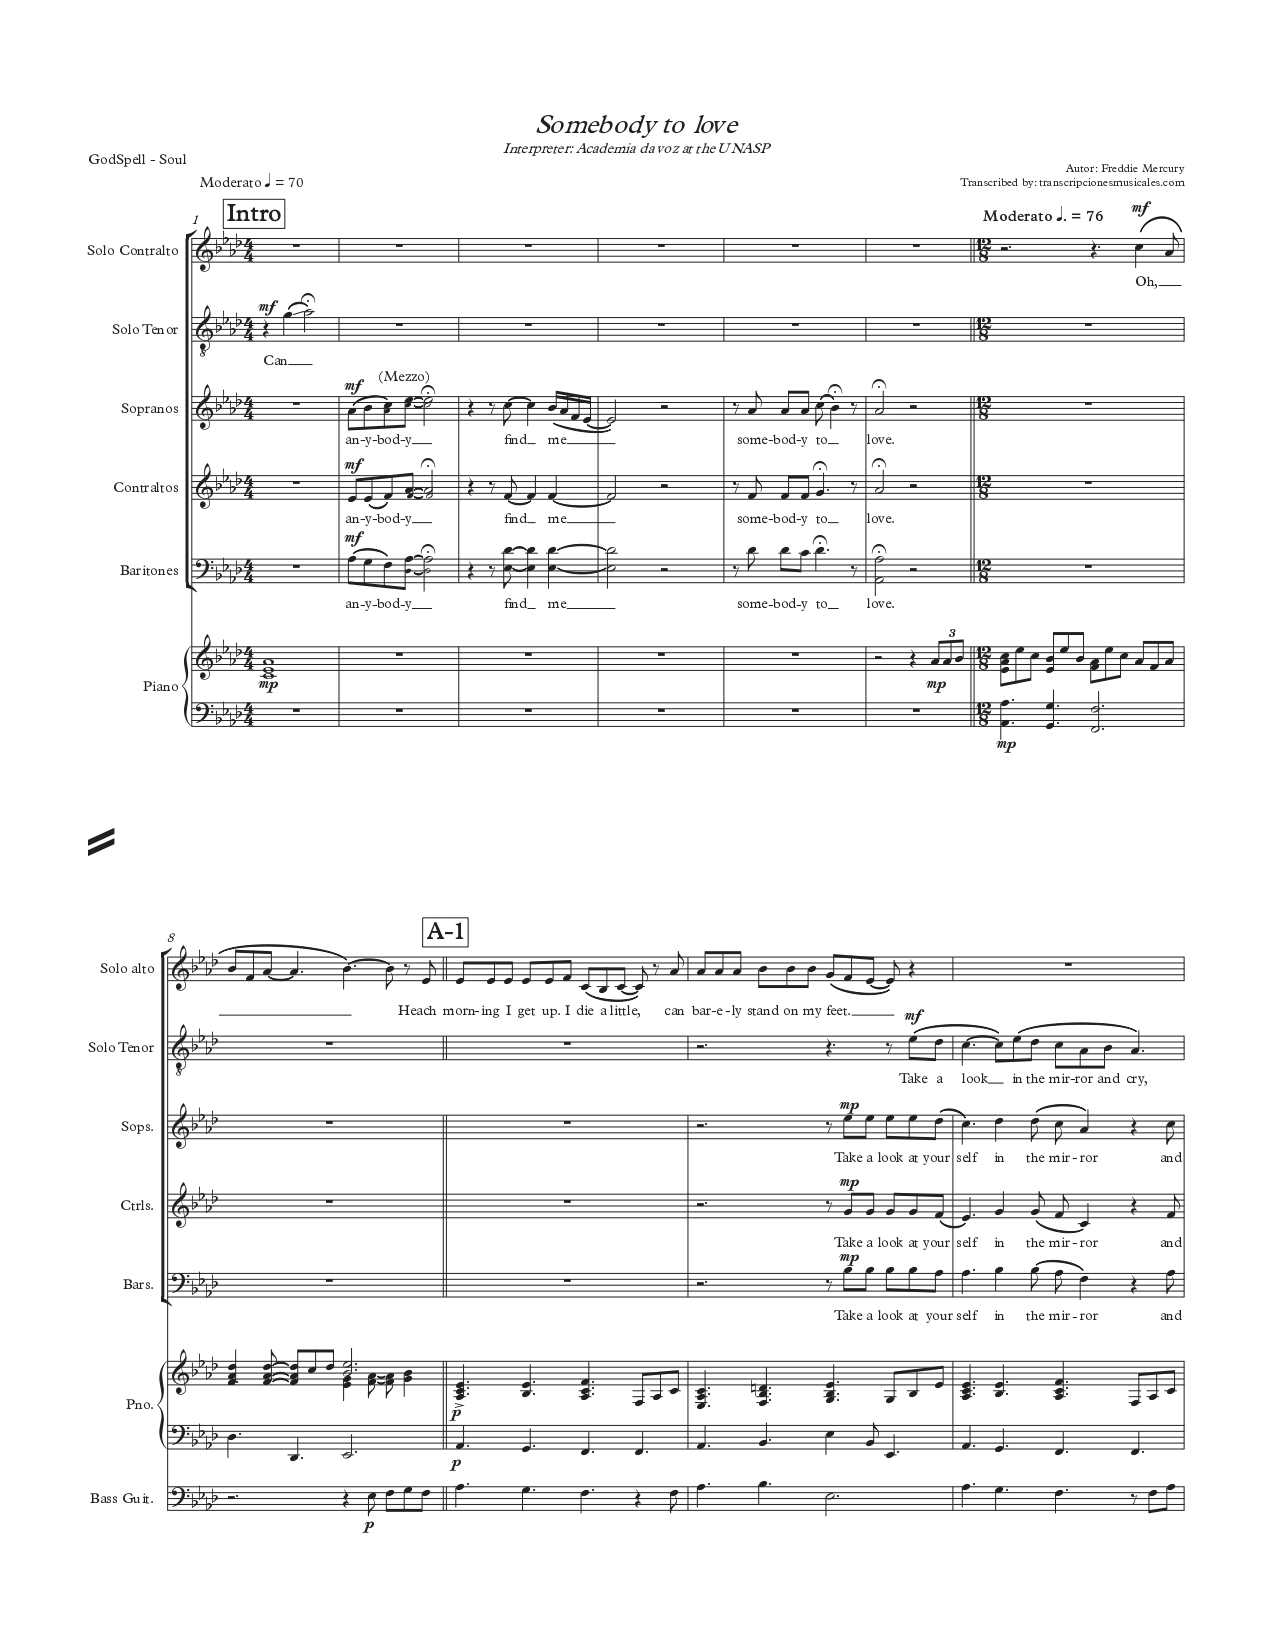 Somebody to love - sheet music page 1